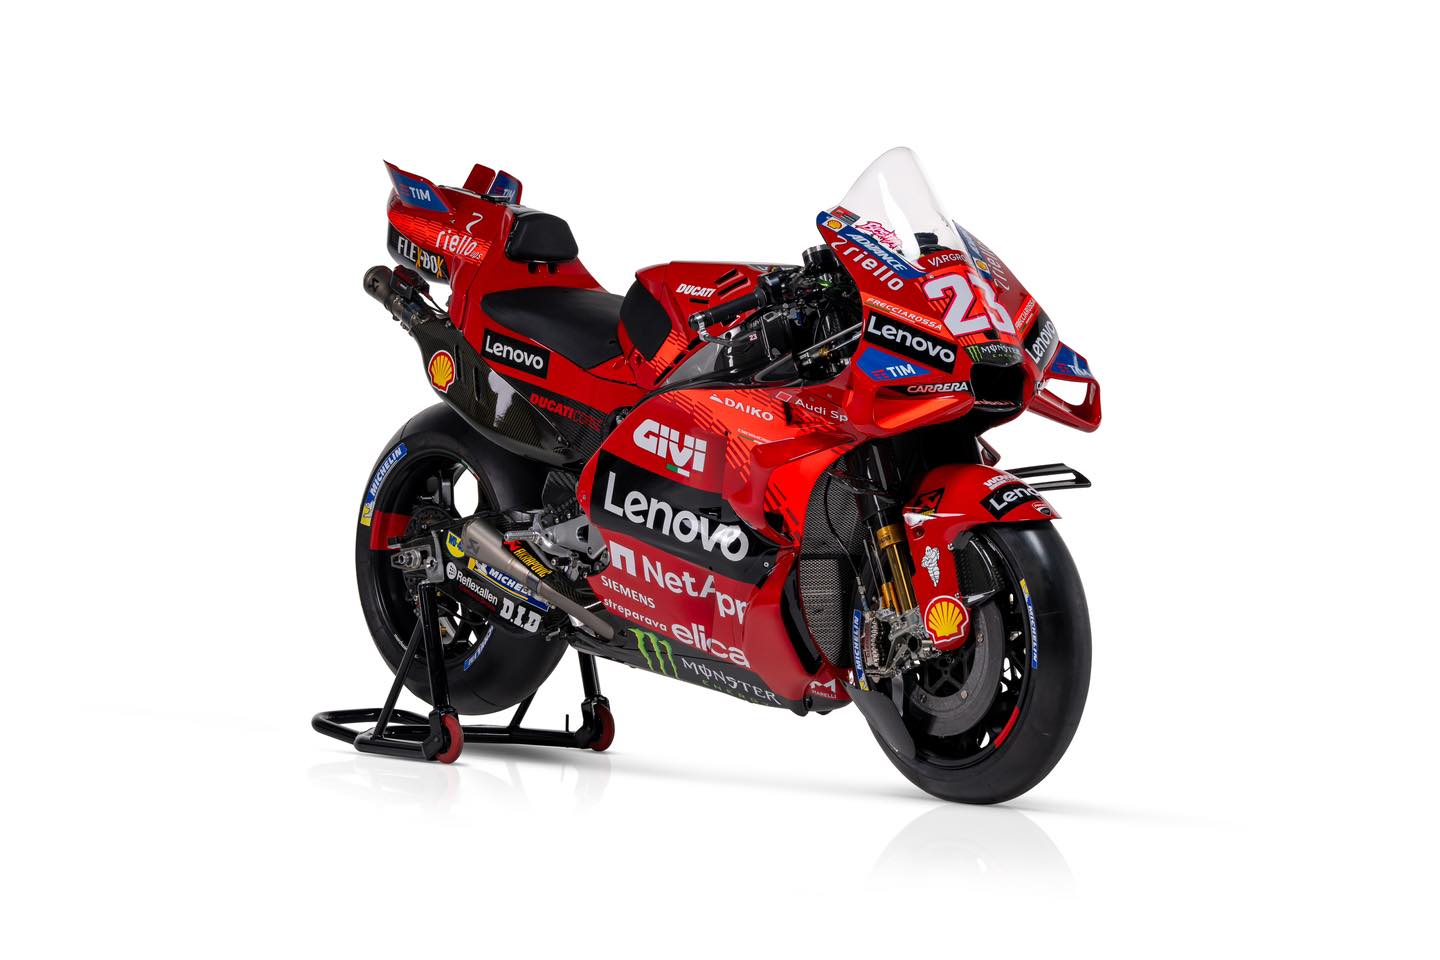 Here is the new Ducati livery for 2024